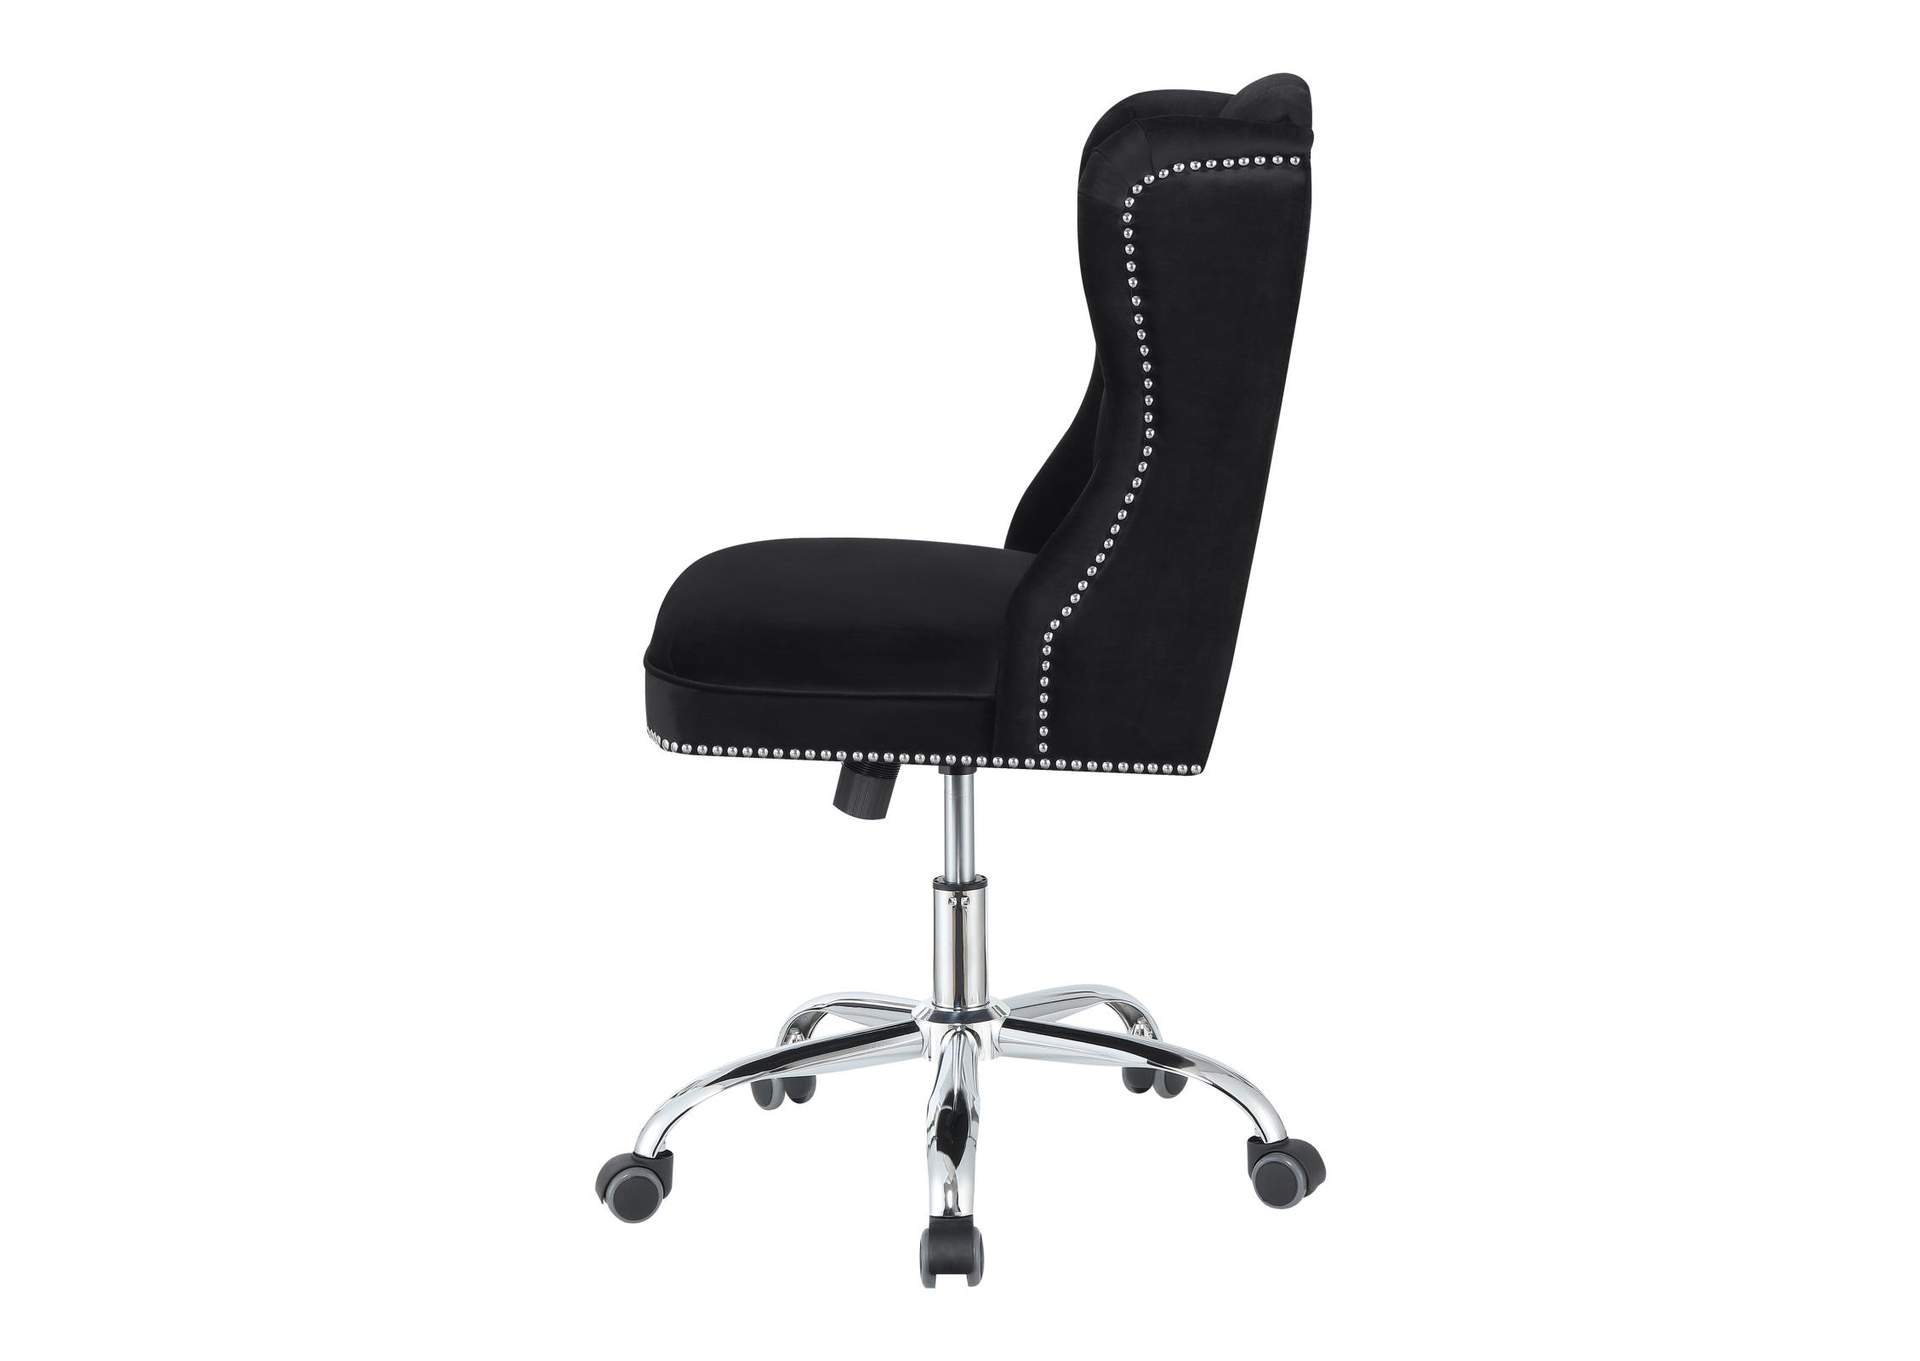 Upholstered Tufted Office Chair Black and Chrome,Coaster Furniture